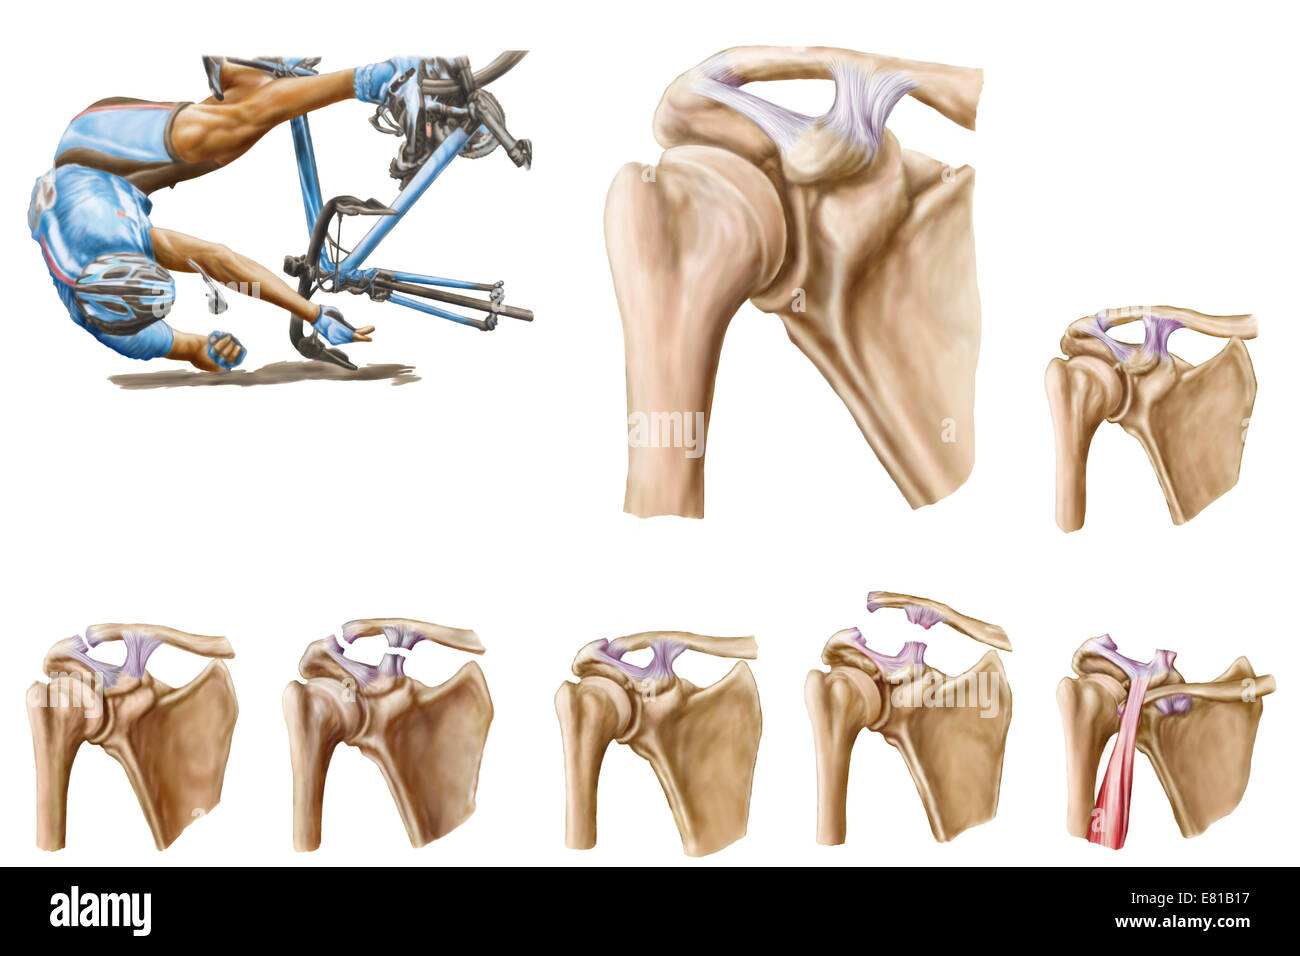 Anatomy of acromioclavicular joint rupture and displacement. Stock Photo